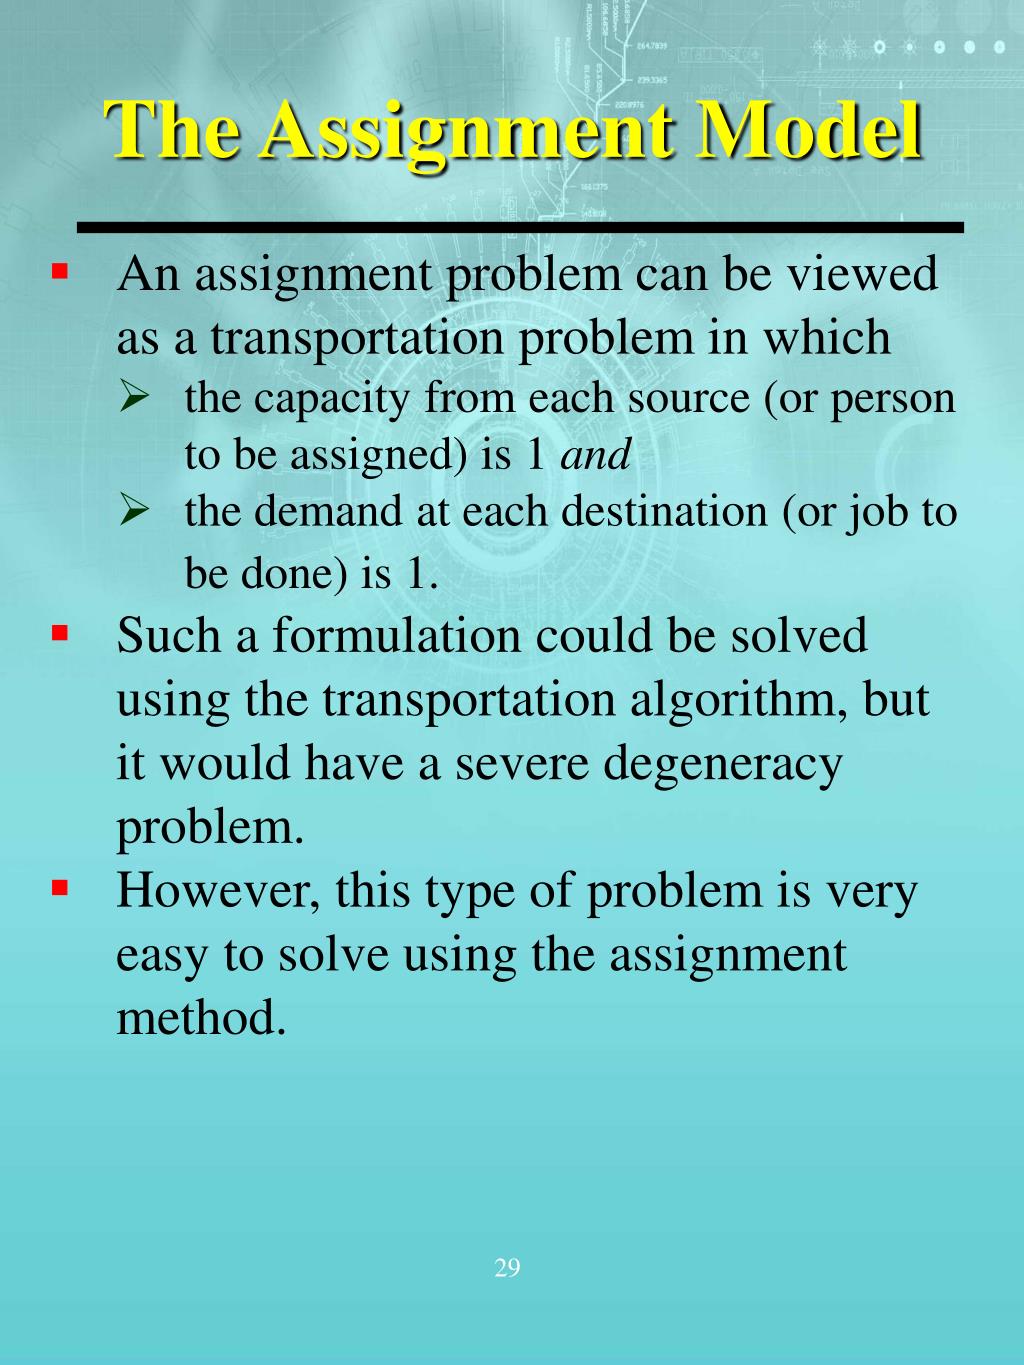 applications of assignment model